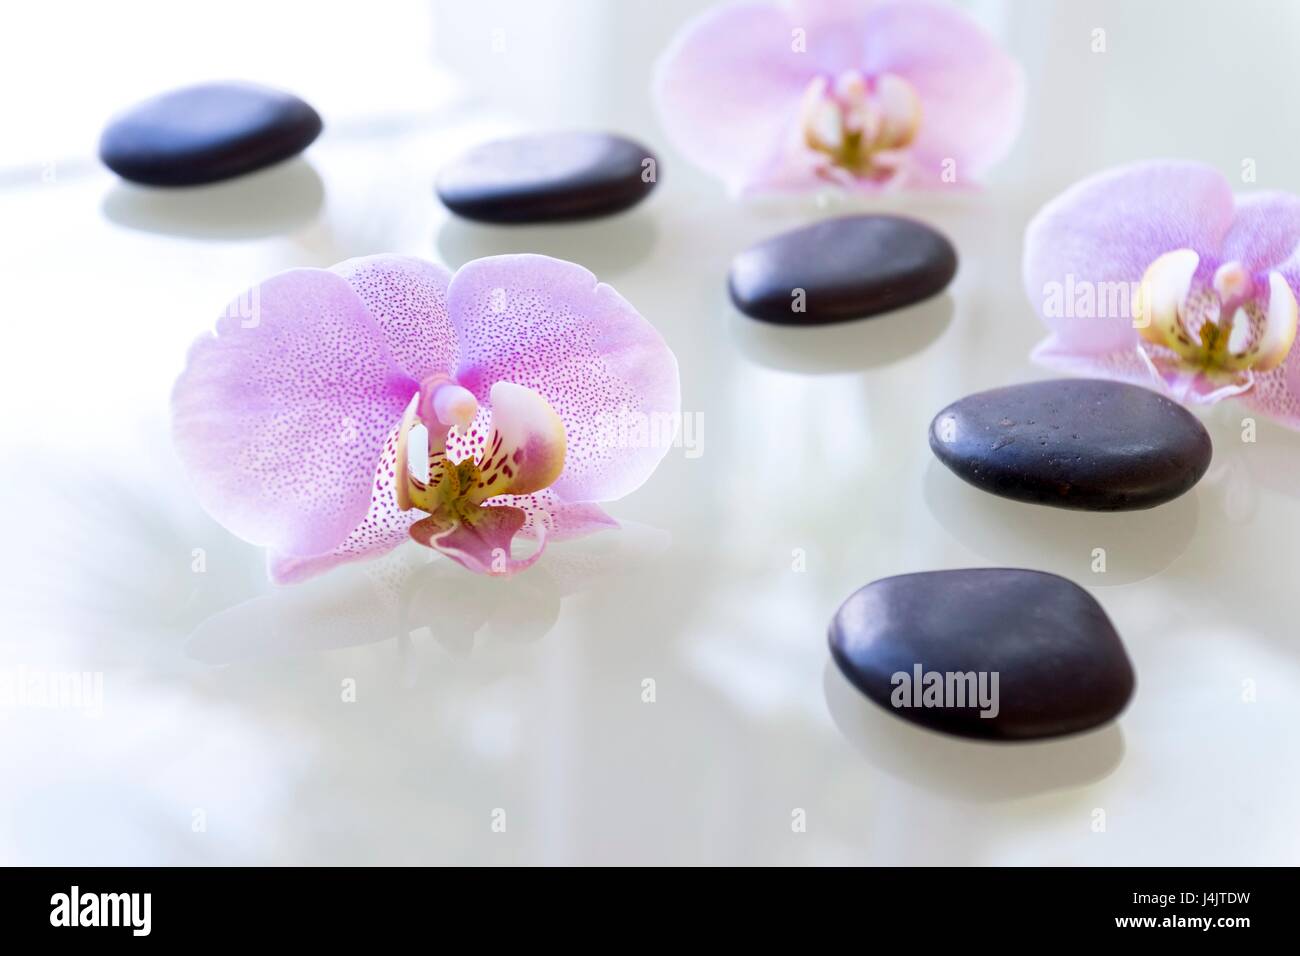 Therapeutic stones and orchids, studio shot. Stock Photo